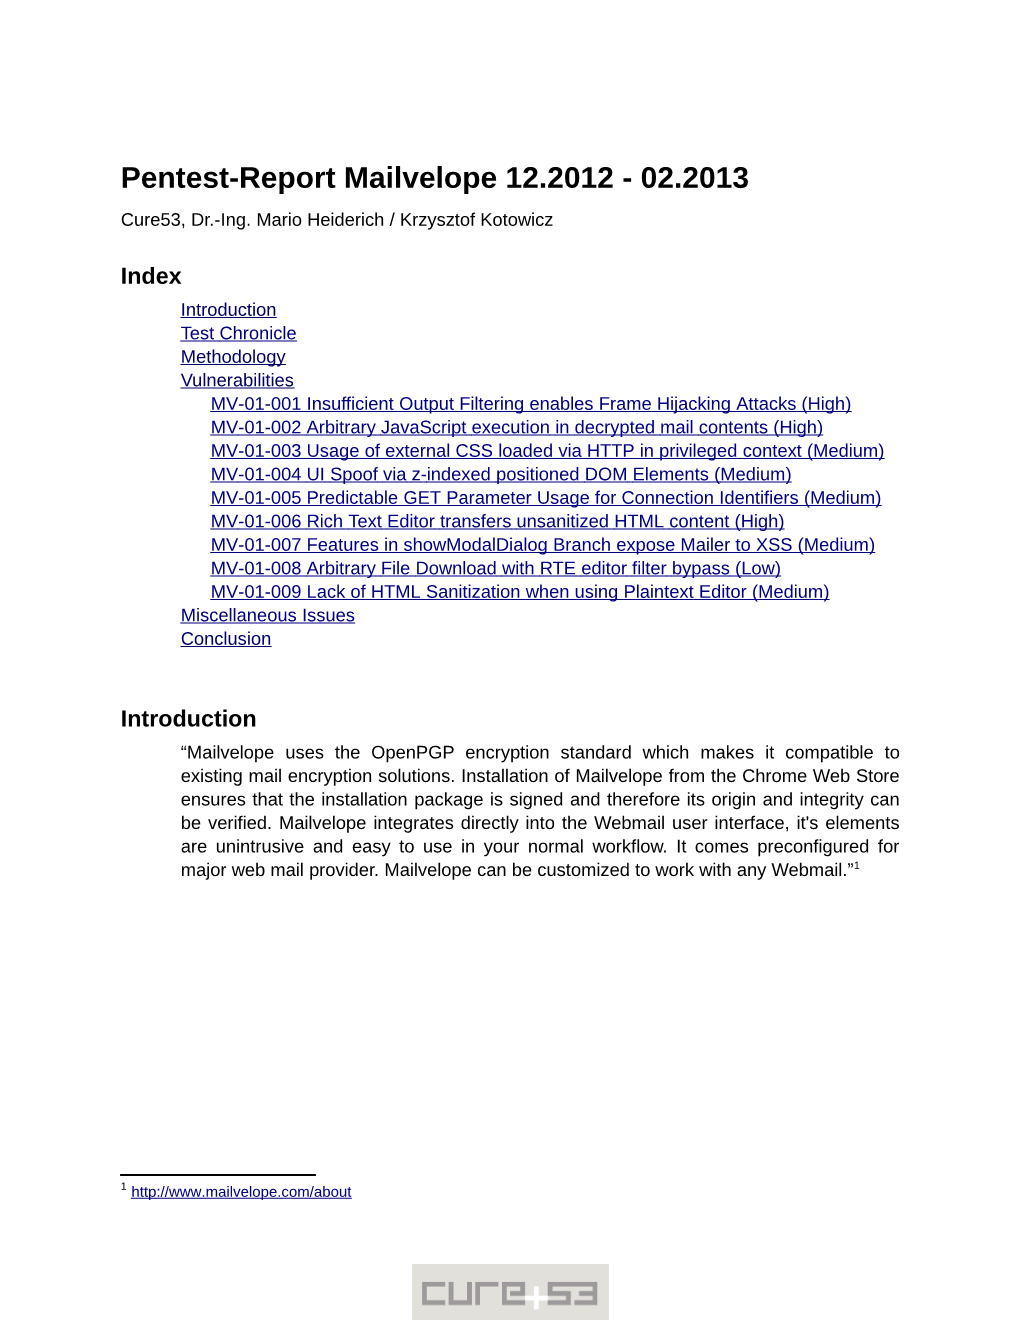 Pentest-Report Mailvelope 12.2012 - 02.2013 Cure53, Dr.-Ing